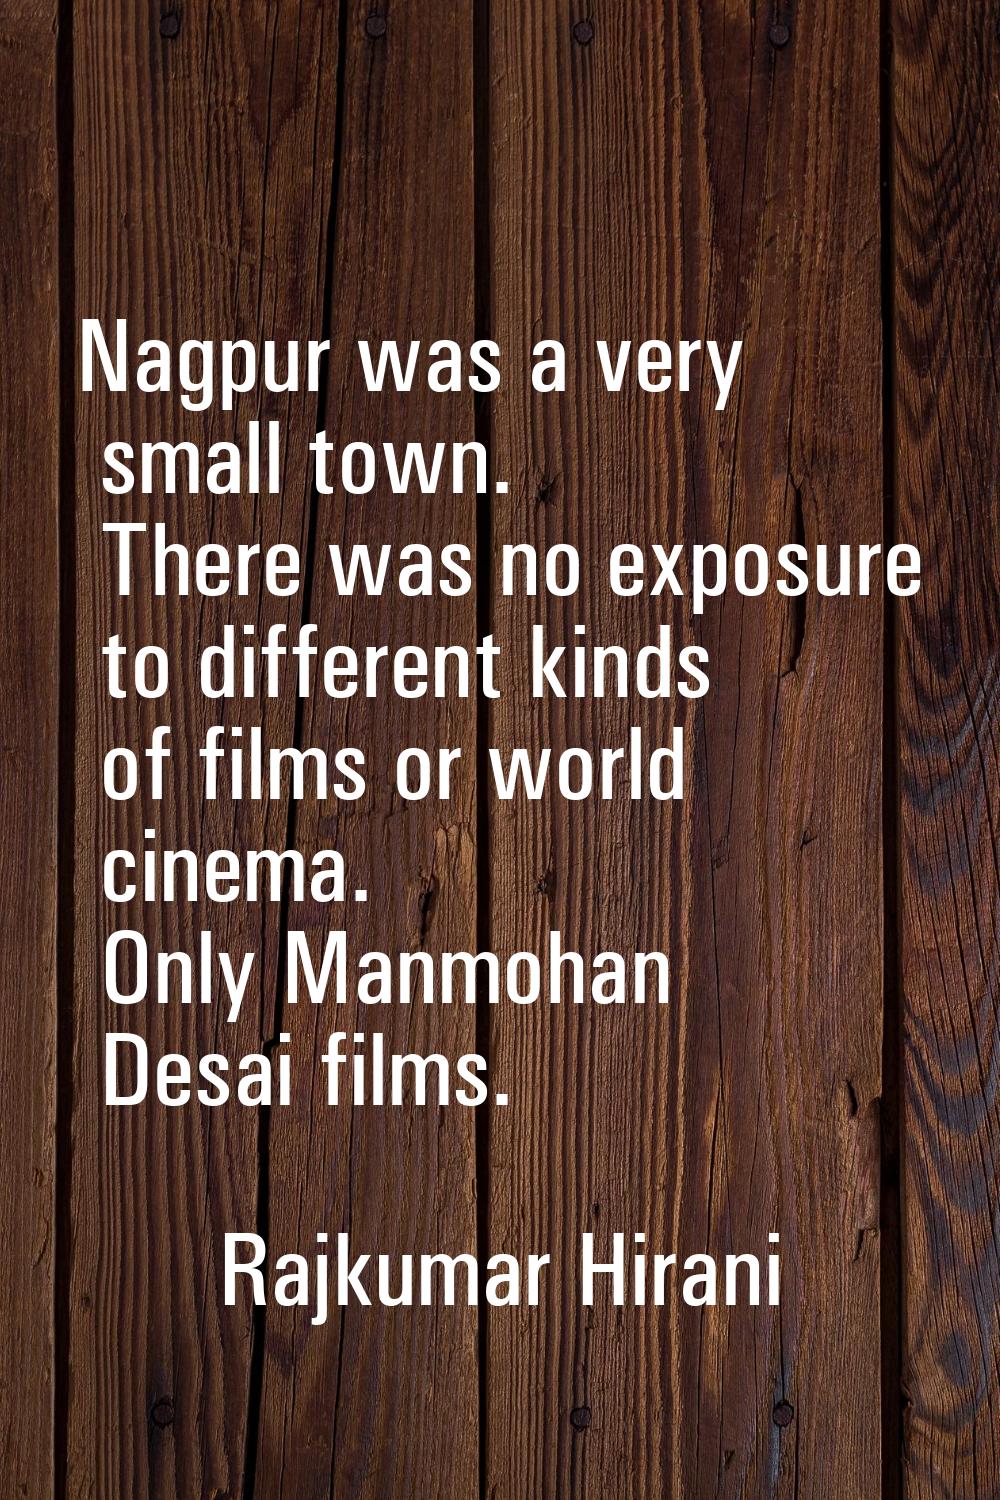 Nagpur was a very small town. There was no exposure to different kinds of films or world cinema. On